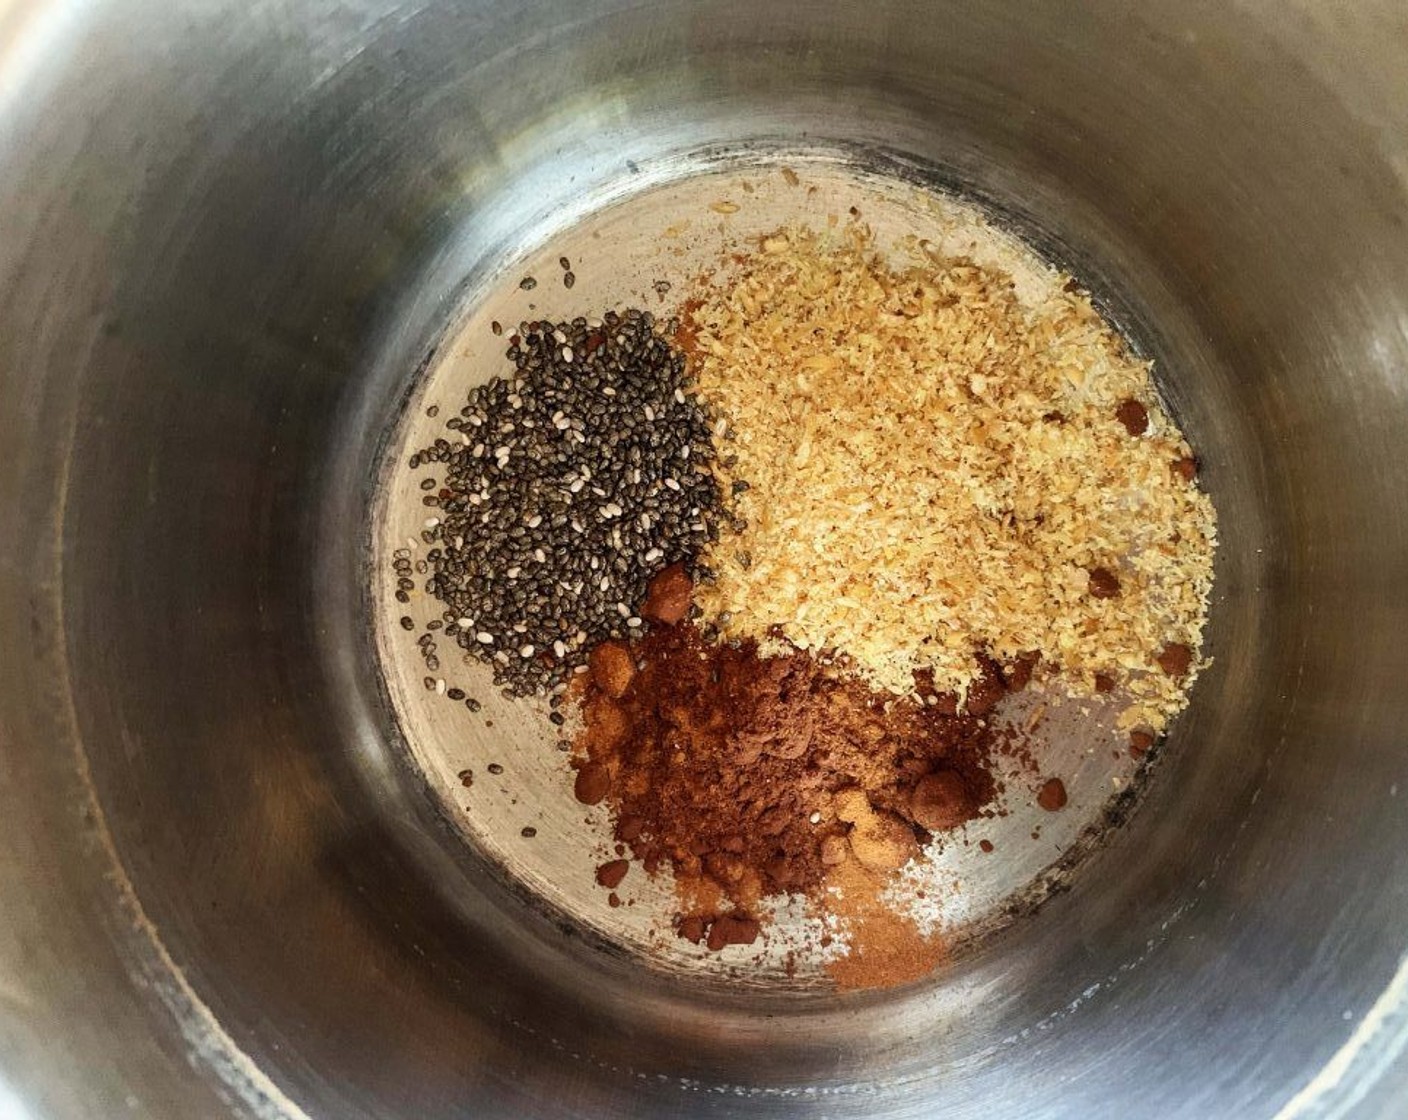 step 1 Place the Flaxseeds (1/2 Tbsp), Chia Seeds (1/2 tsp), Unsweetened Cocoa Powder (1 tsp), Ground Cinnamon (1 dash) and Stevia (1 packet) into a saucepan.